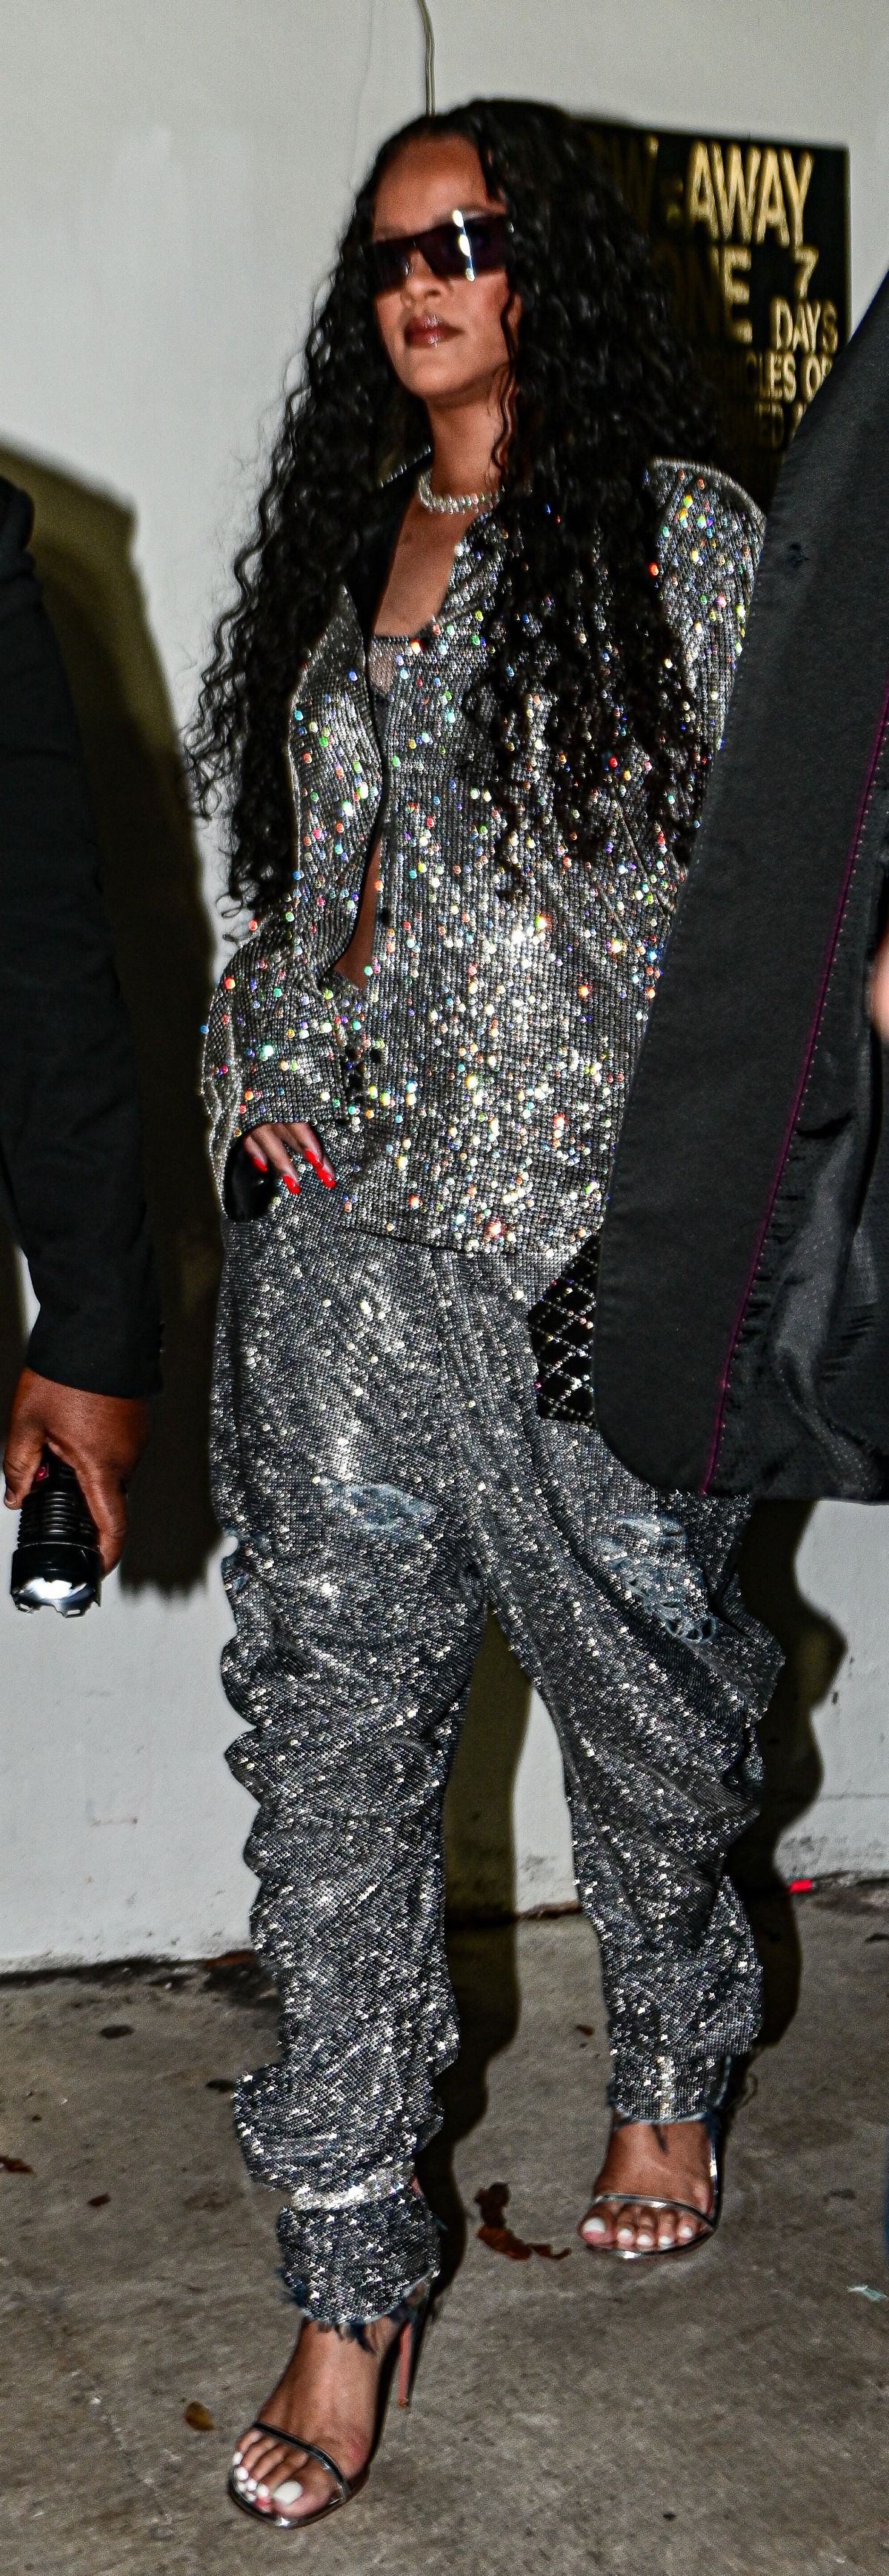 RIHANNA at Asap Rocky’s Concert at Story Nightclub in Miami 12/01/2022 ...